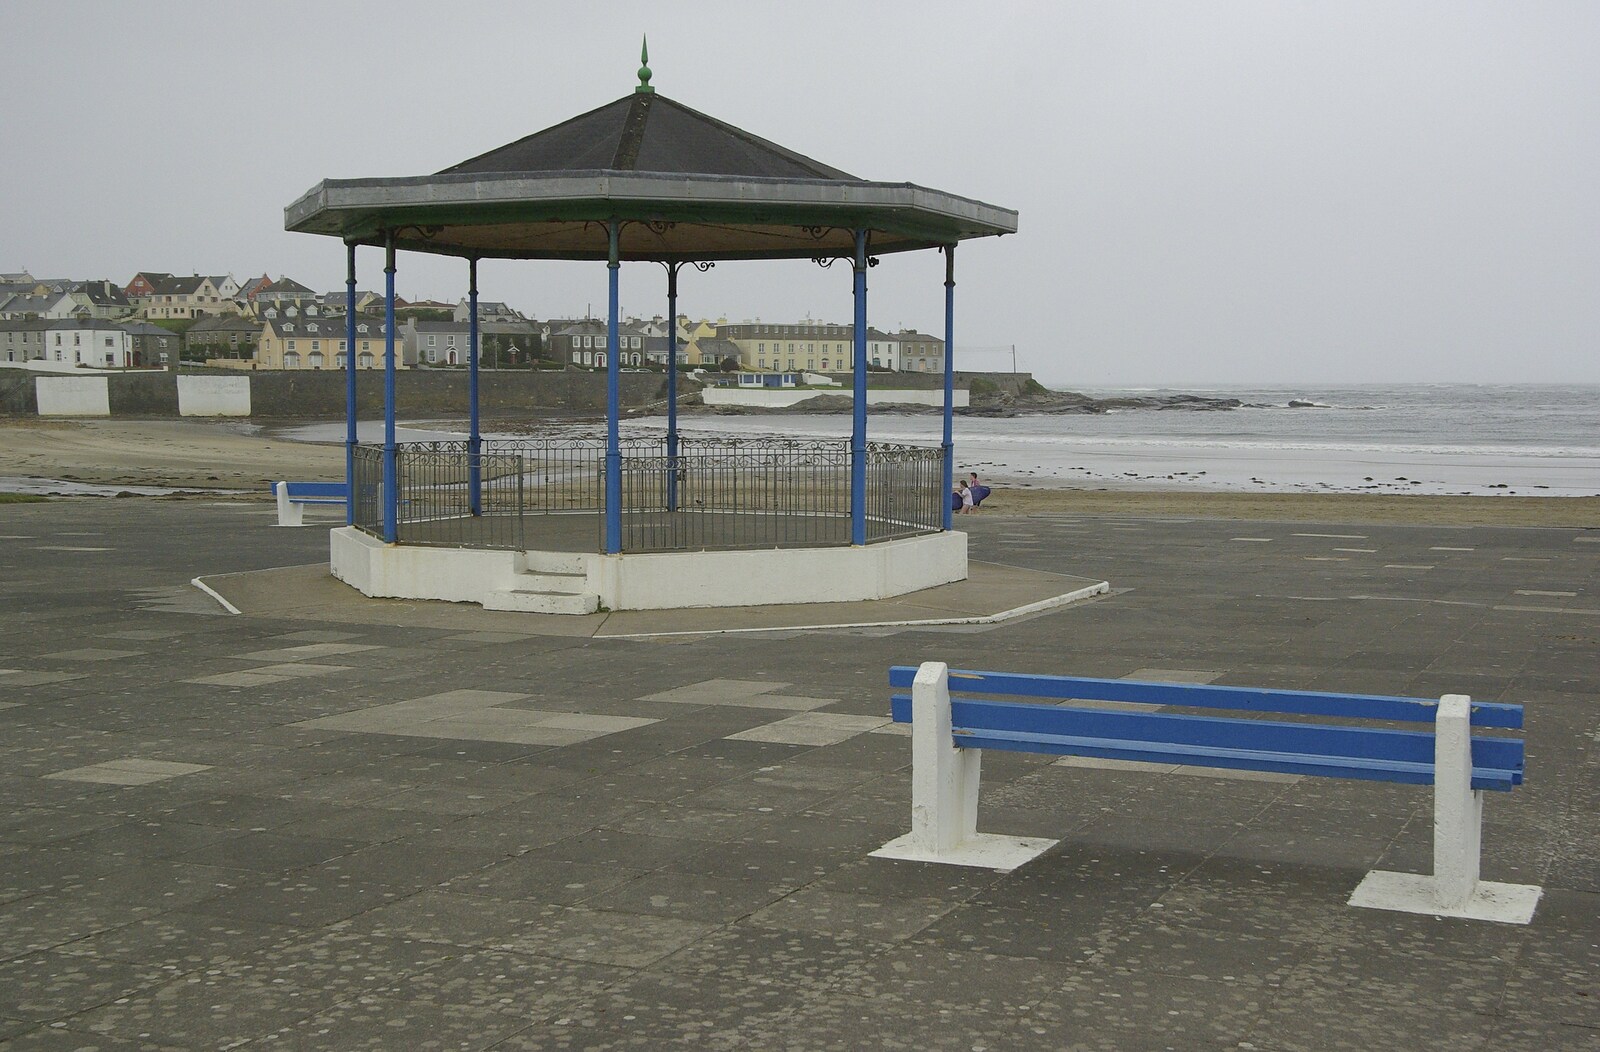 30th Birthday Party in Kilkee, County Clare, Ireland - 22nd September 2007: An empty band stand